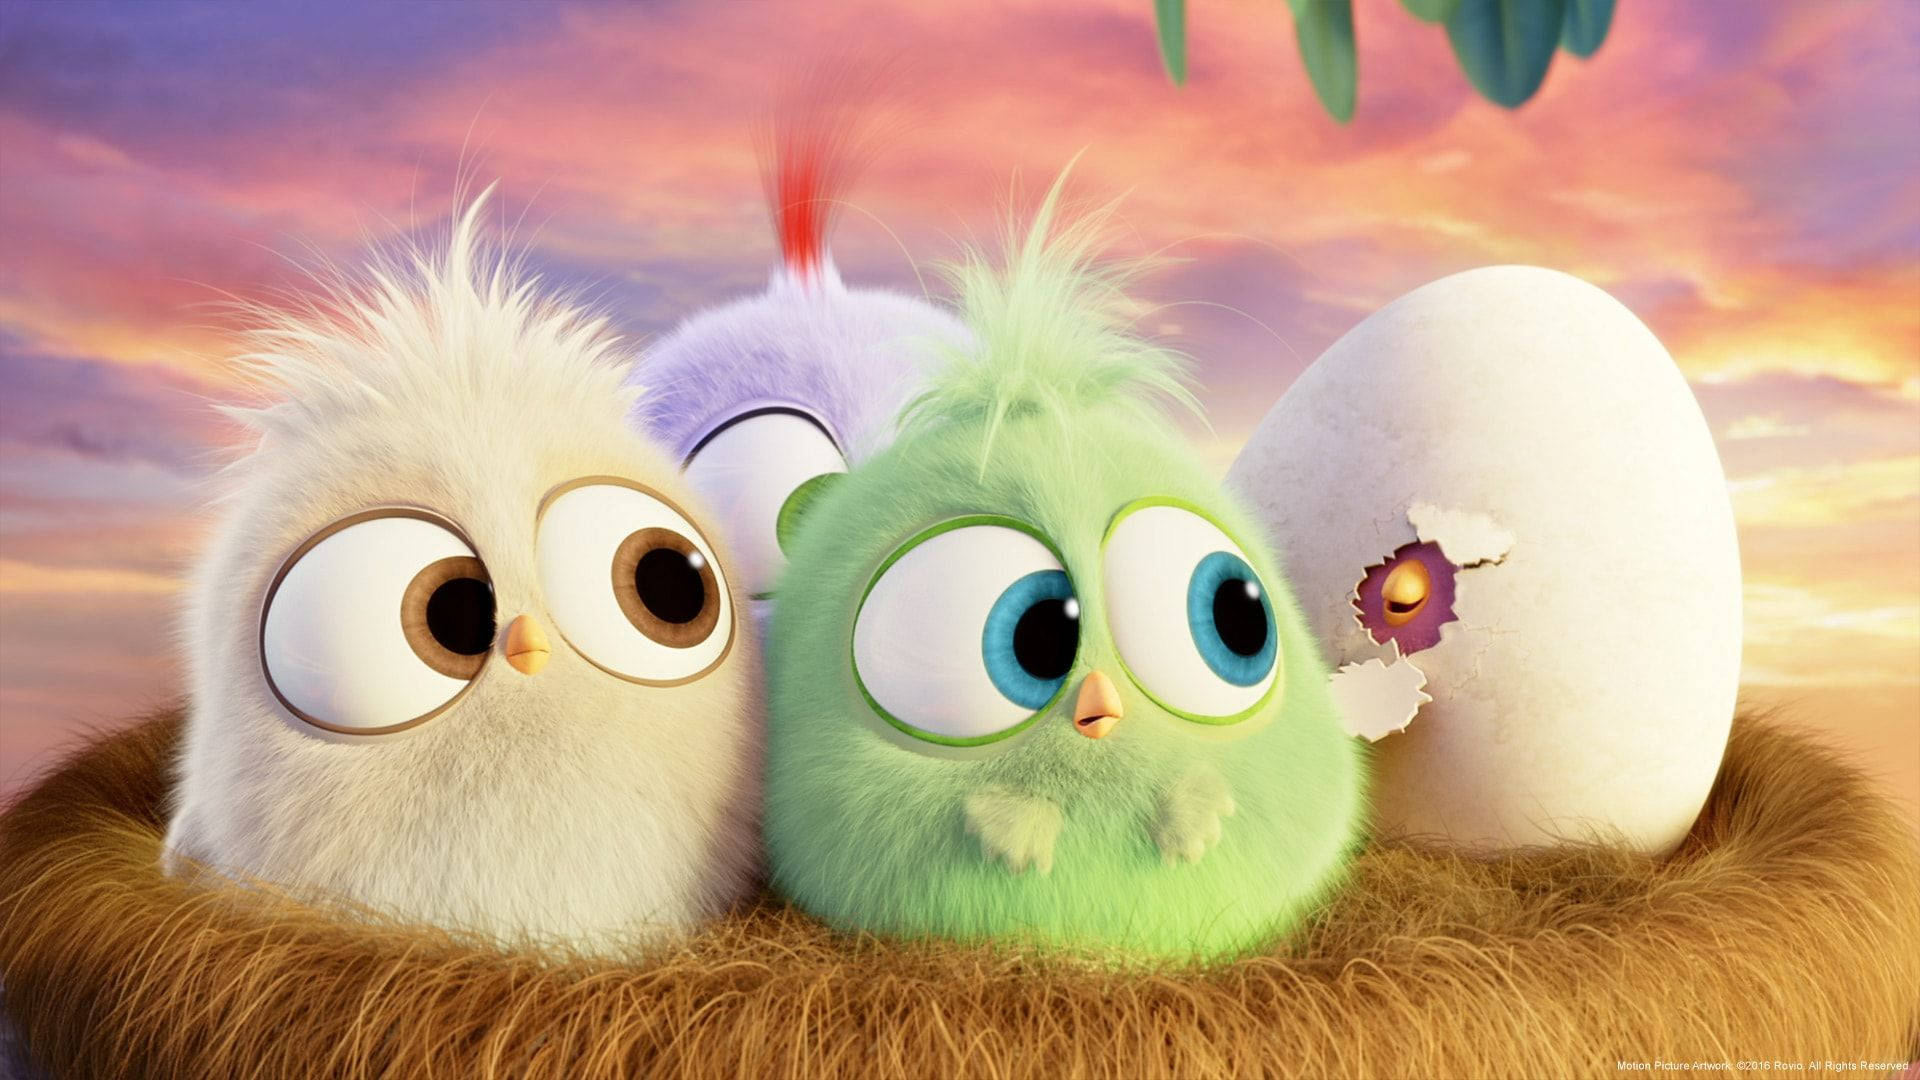 Enter the World of Angry Birds Wallpaper